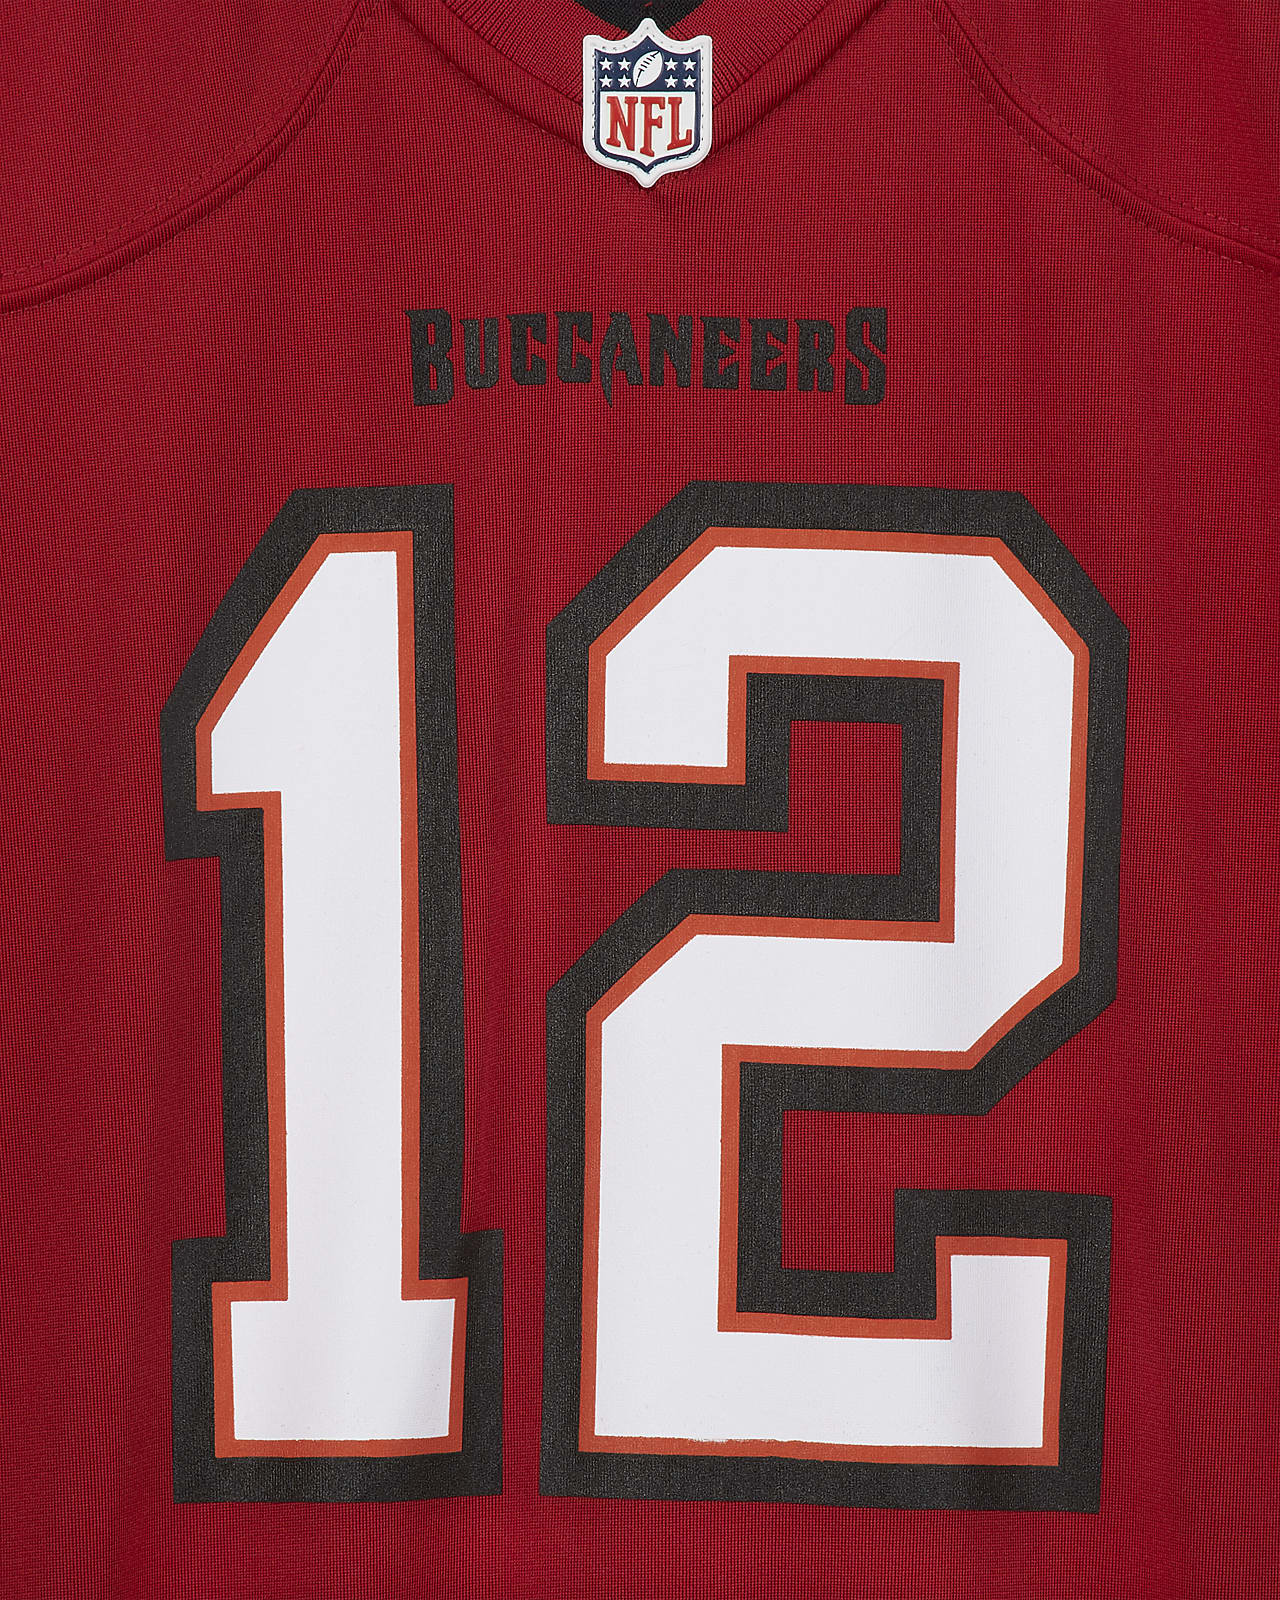 where can i buy a tom brady buccaneers jersey